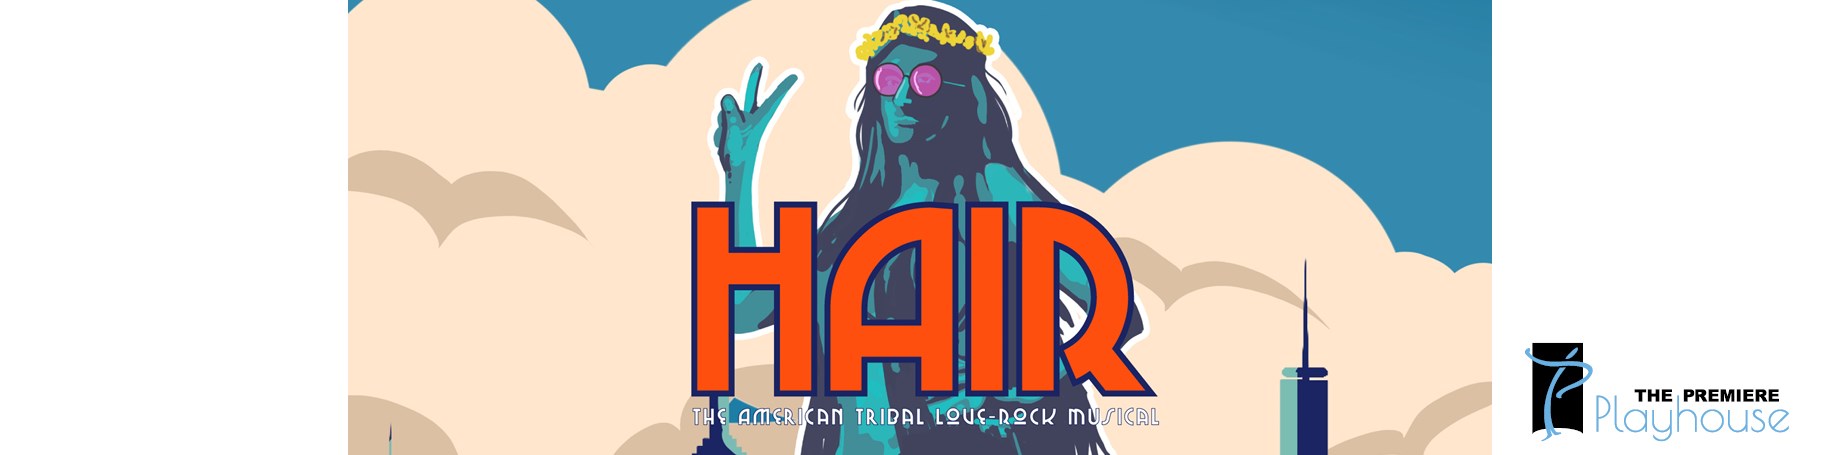 The Premiere Playhouse presents Hair